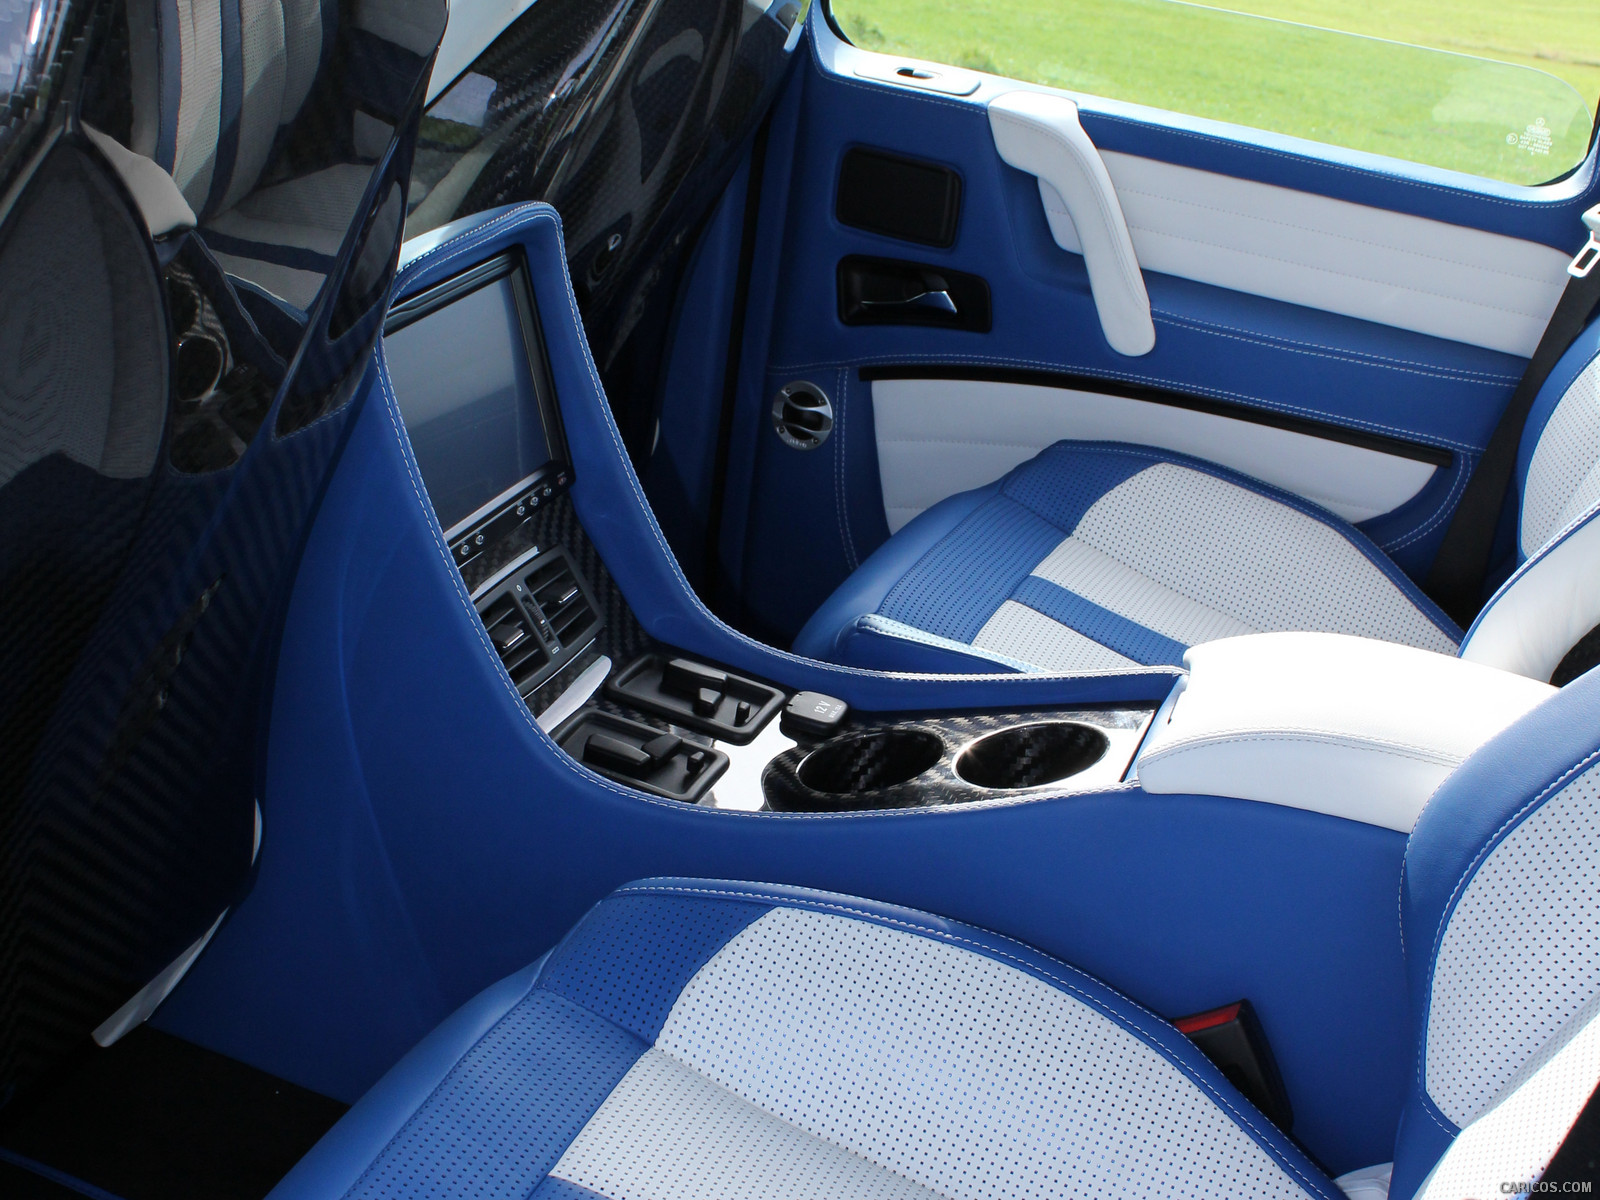 Mansory G-Couture based on Mercedes G-Class  - Interior Rear Seats, #36 of 39